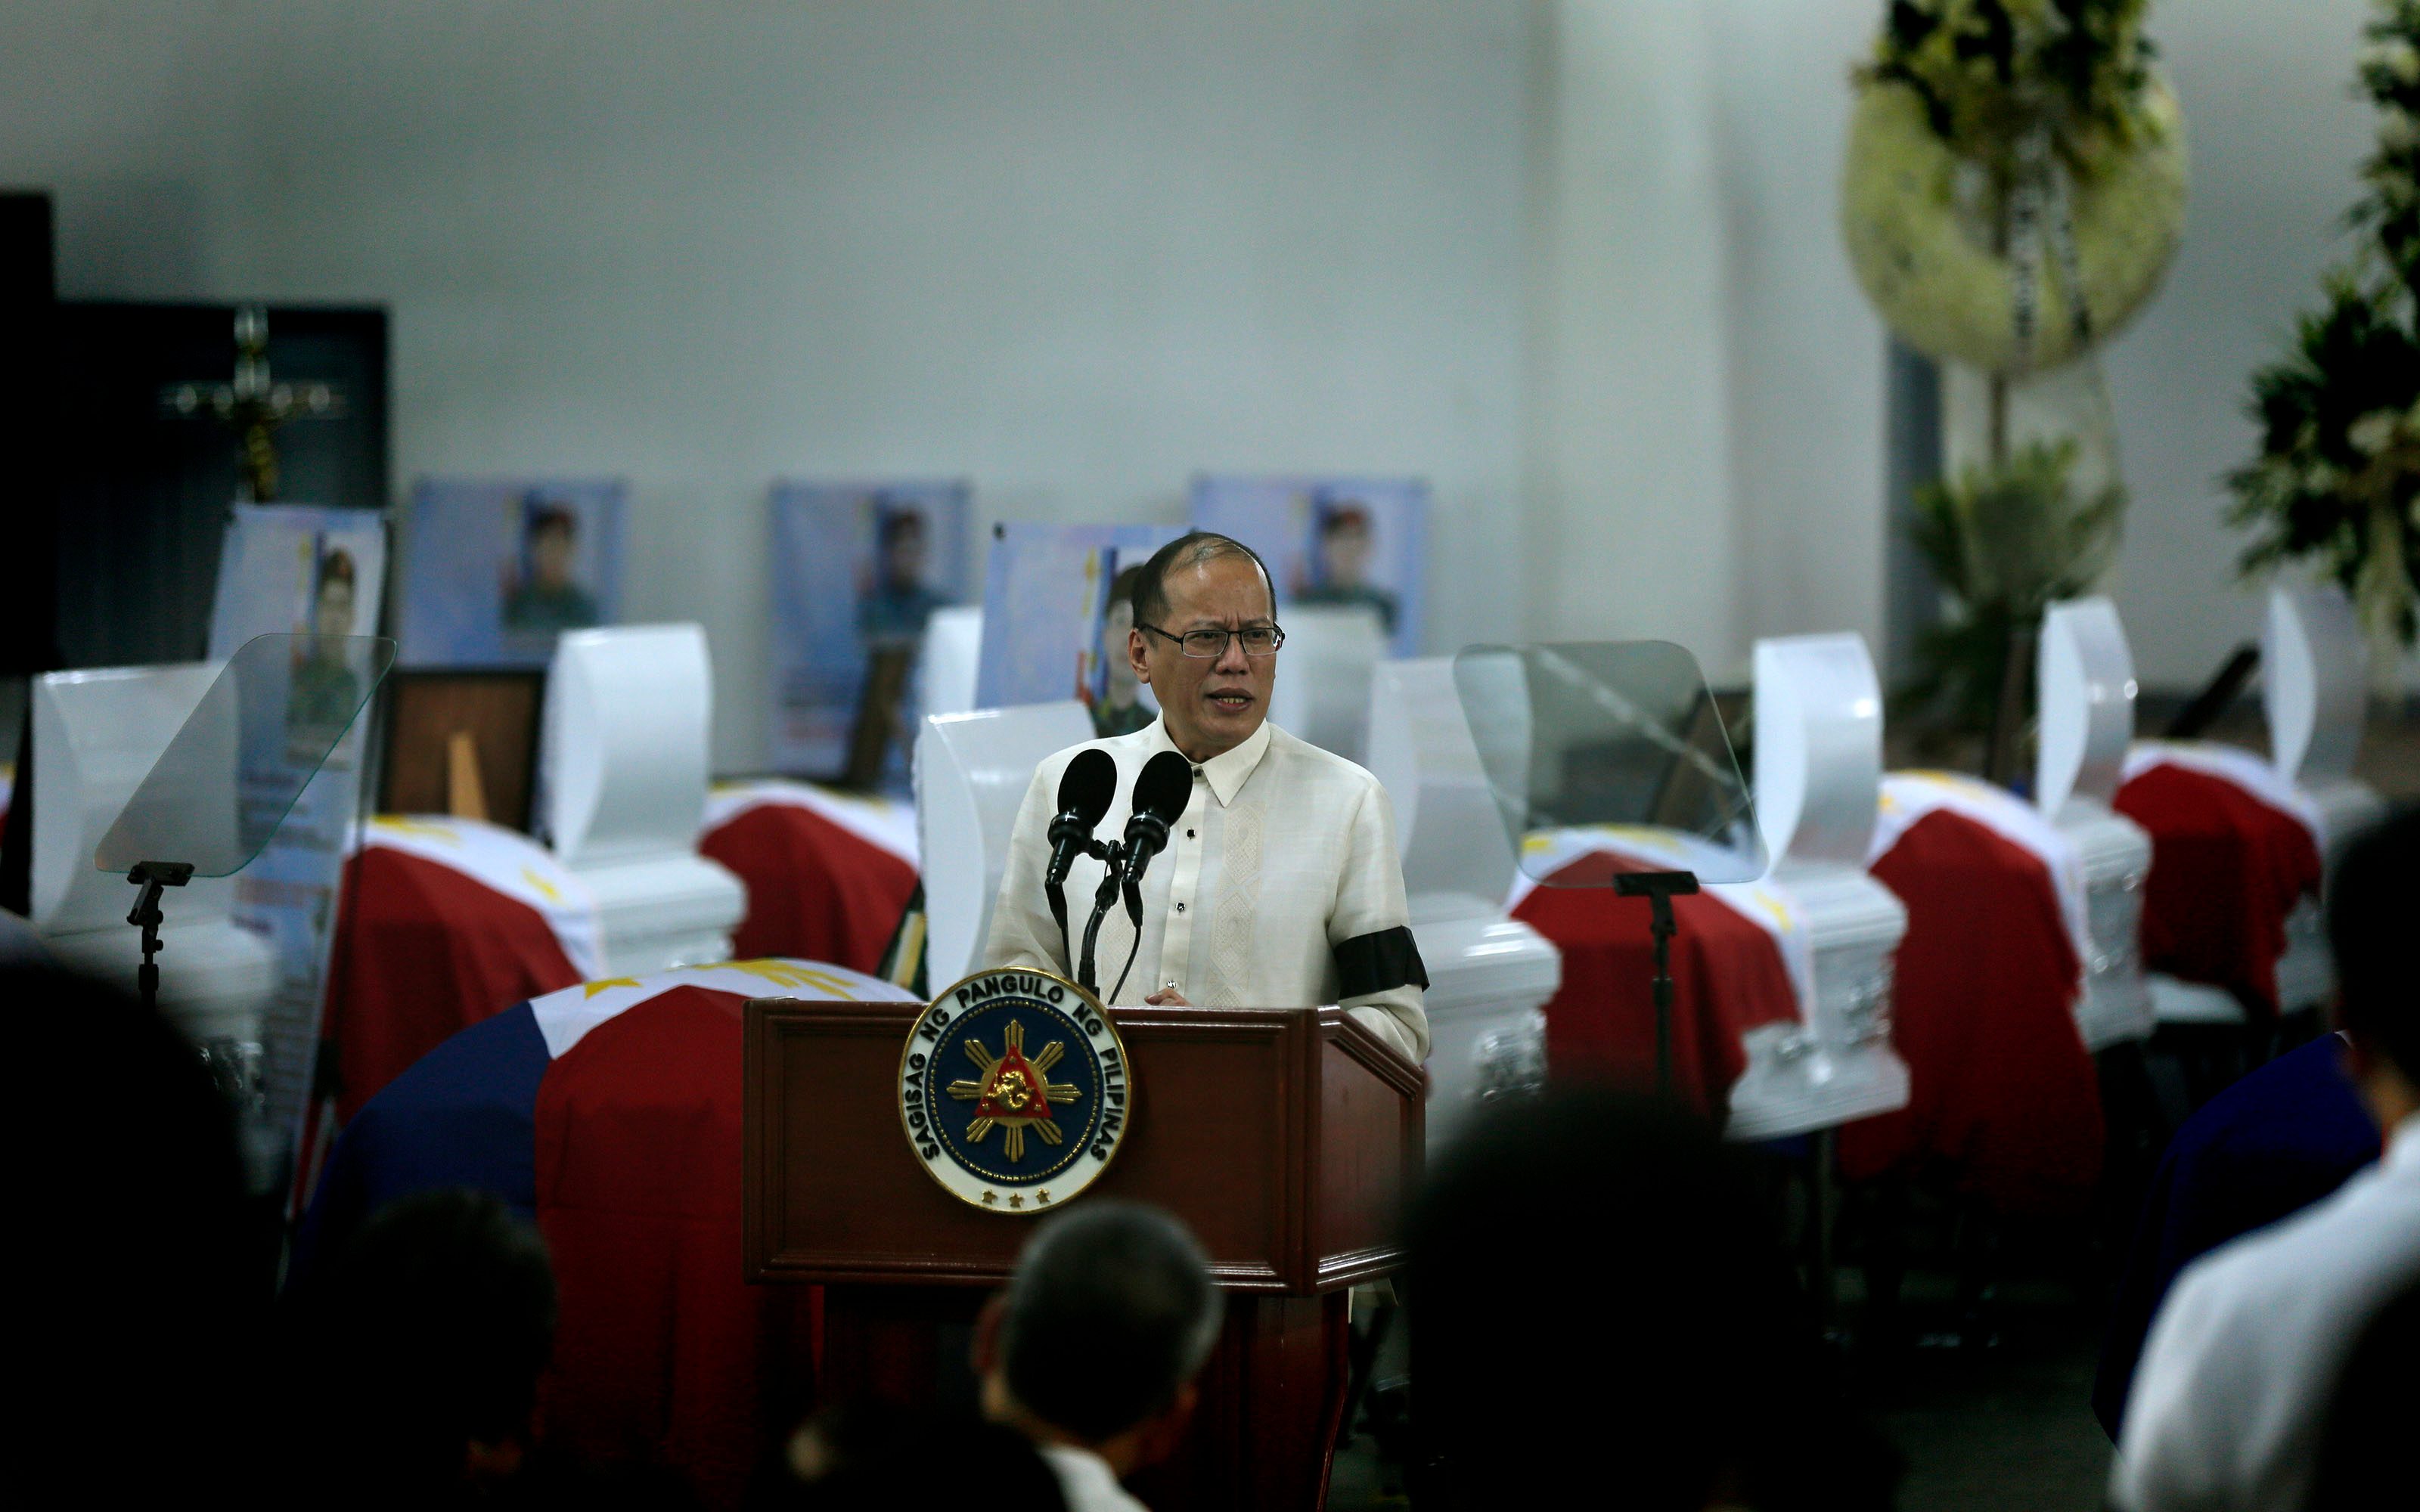 Anti-corruption execs laud Aquino’s bravery, which he practiced ‘even to his discredit’